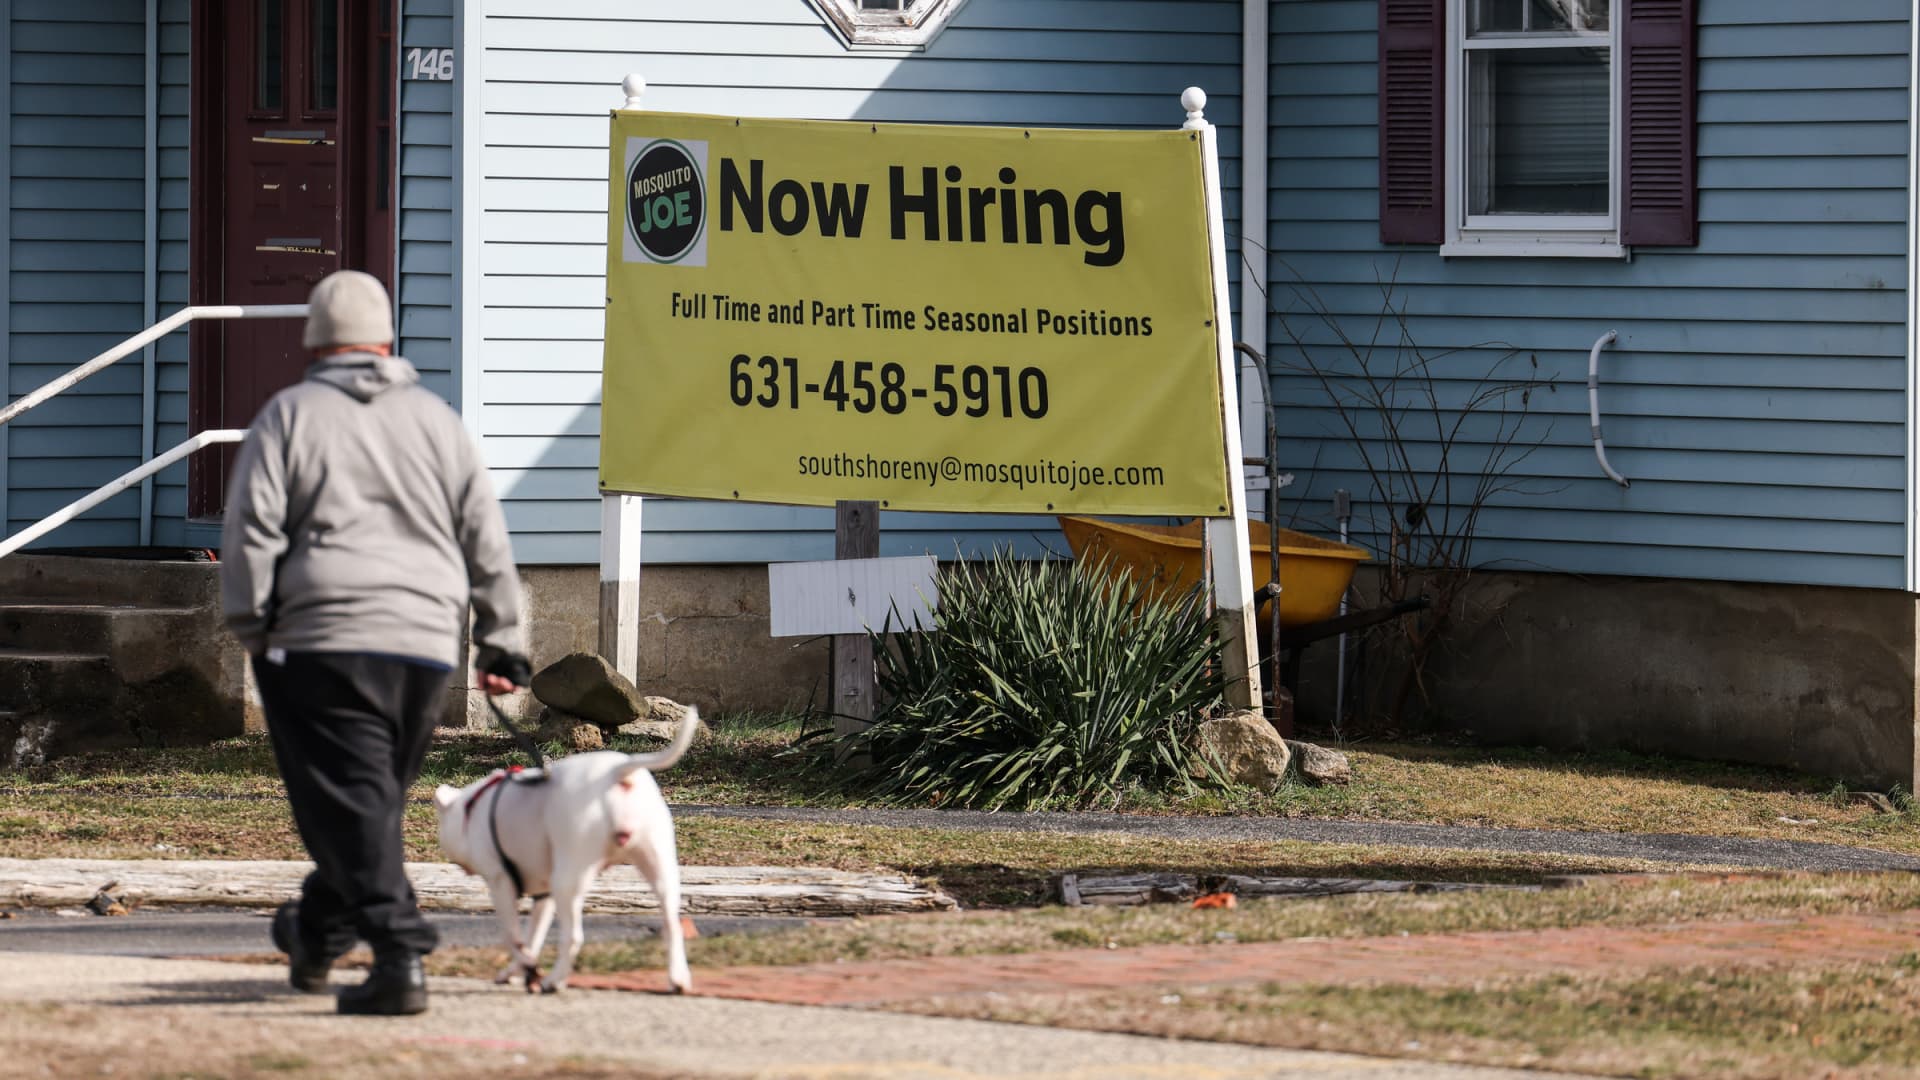 Job openings show sharp decline, but still vastly outnumber available workers